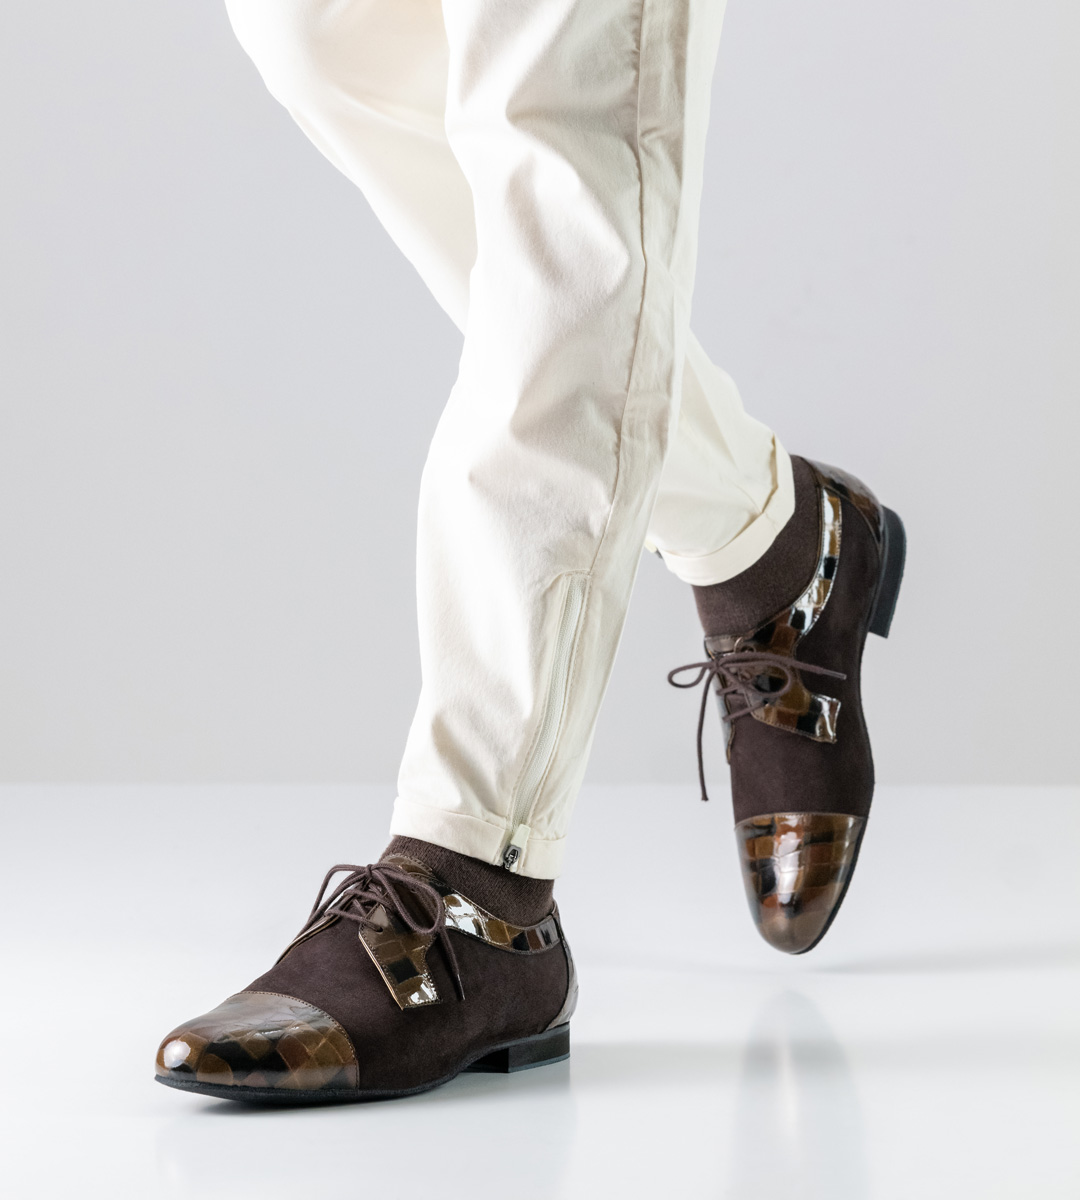 Men's dance shoe by Werner Kern in combination with light trousers